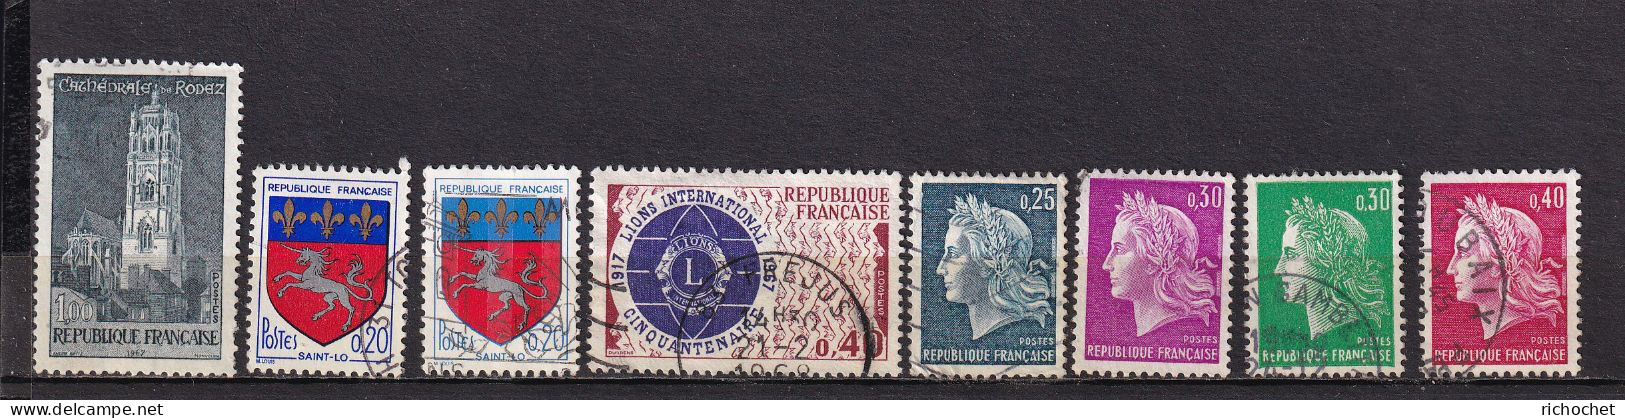 France 1504 + 1510 + 1510c + 1534 + 1535 + 1536 + 1536 A + 1536 B ° - Used Stamps